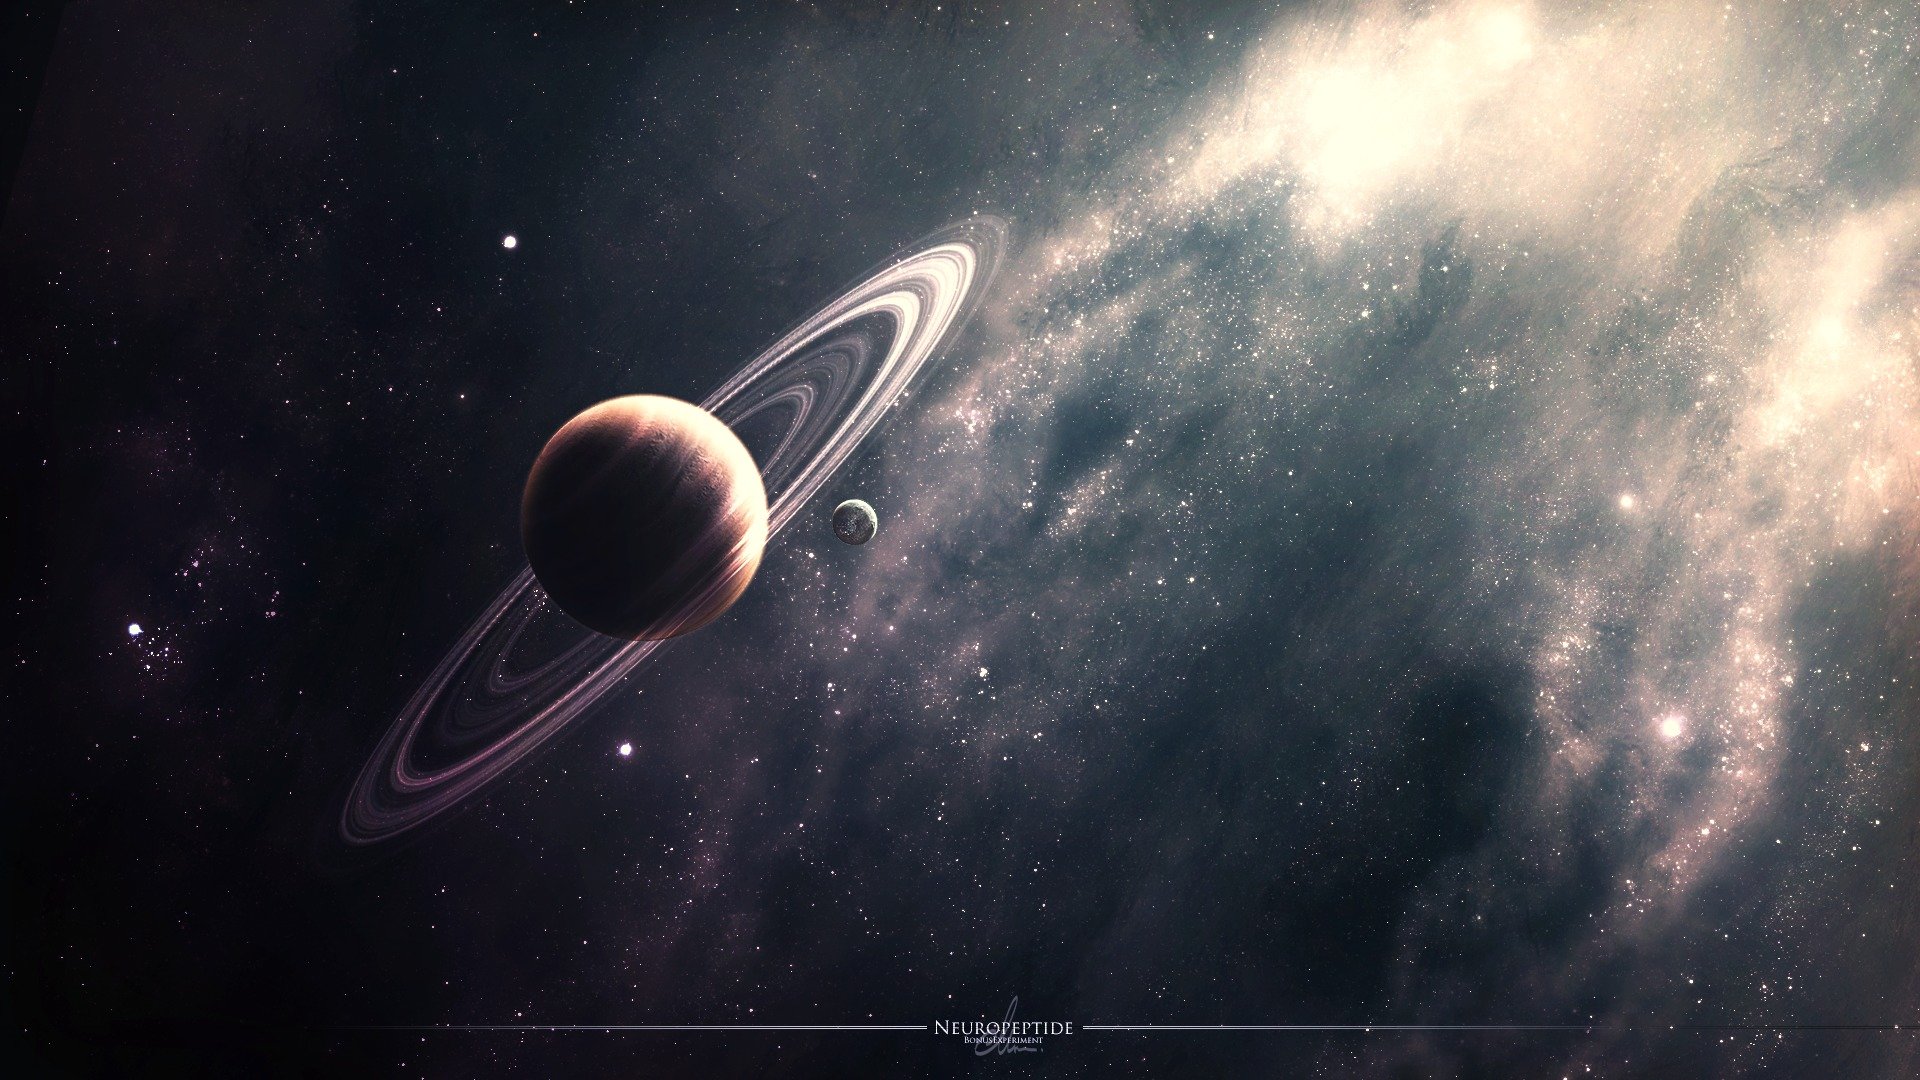 Outer space Saturn wallpaper | 1920x1080 | 257897 | WallpaperUP